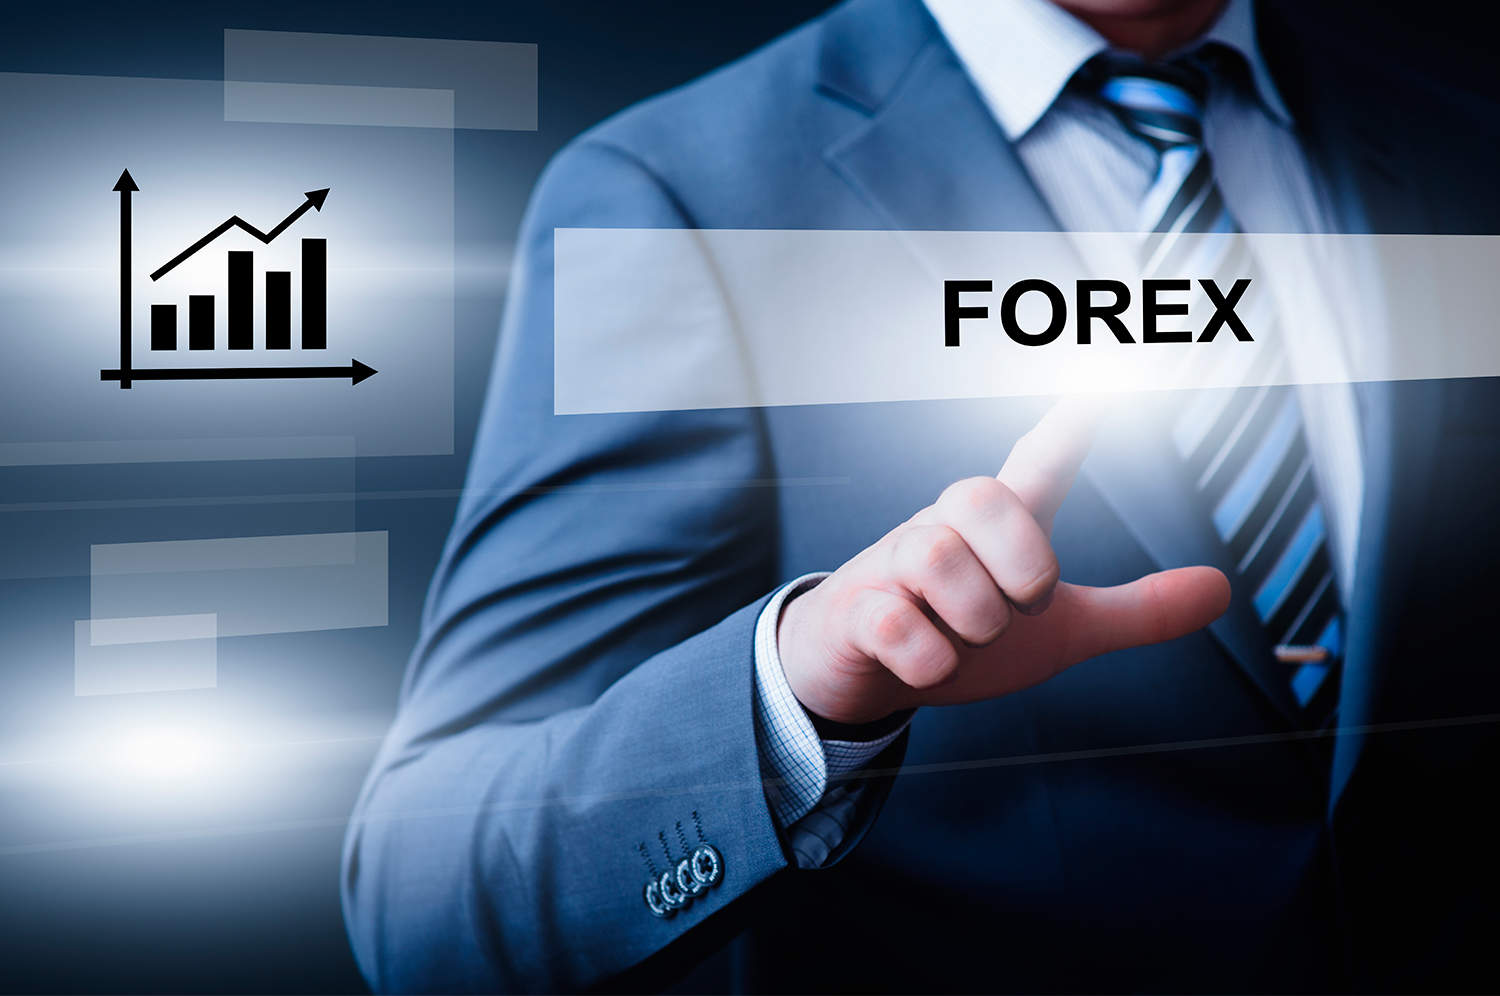 Forex images